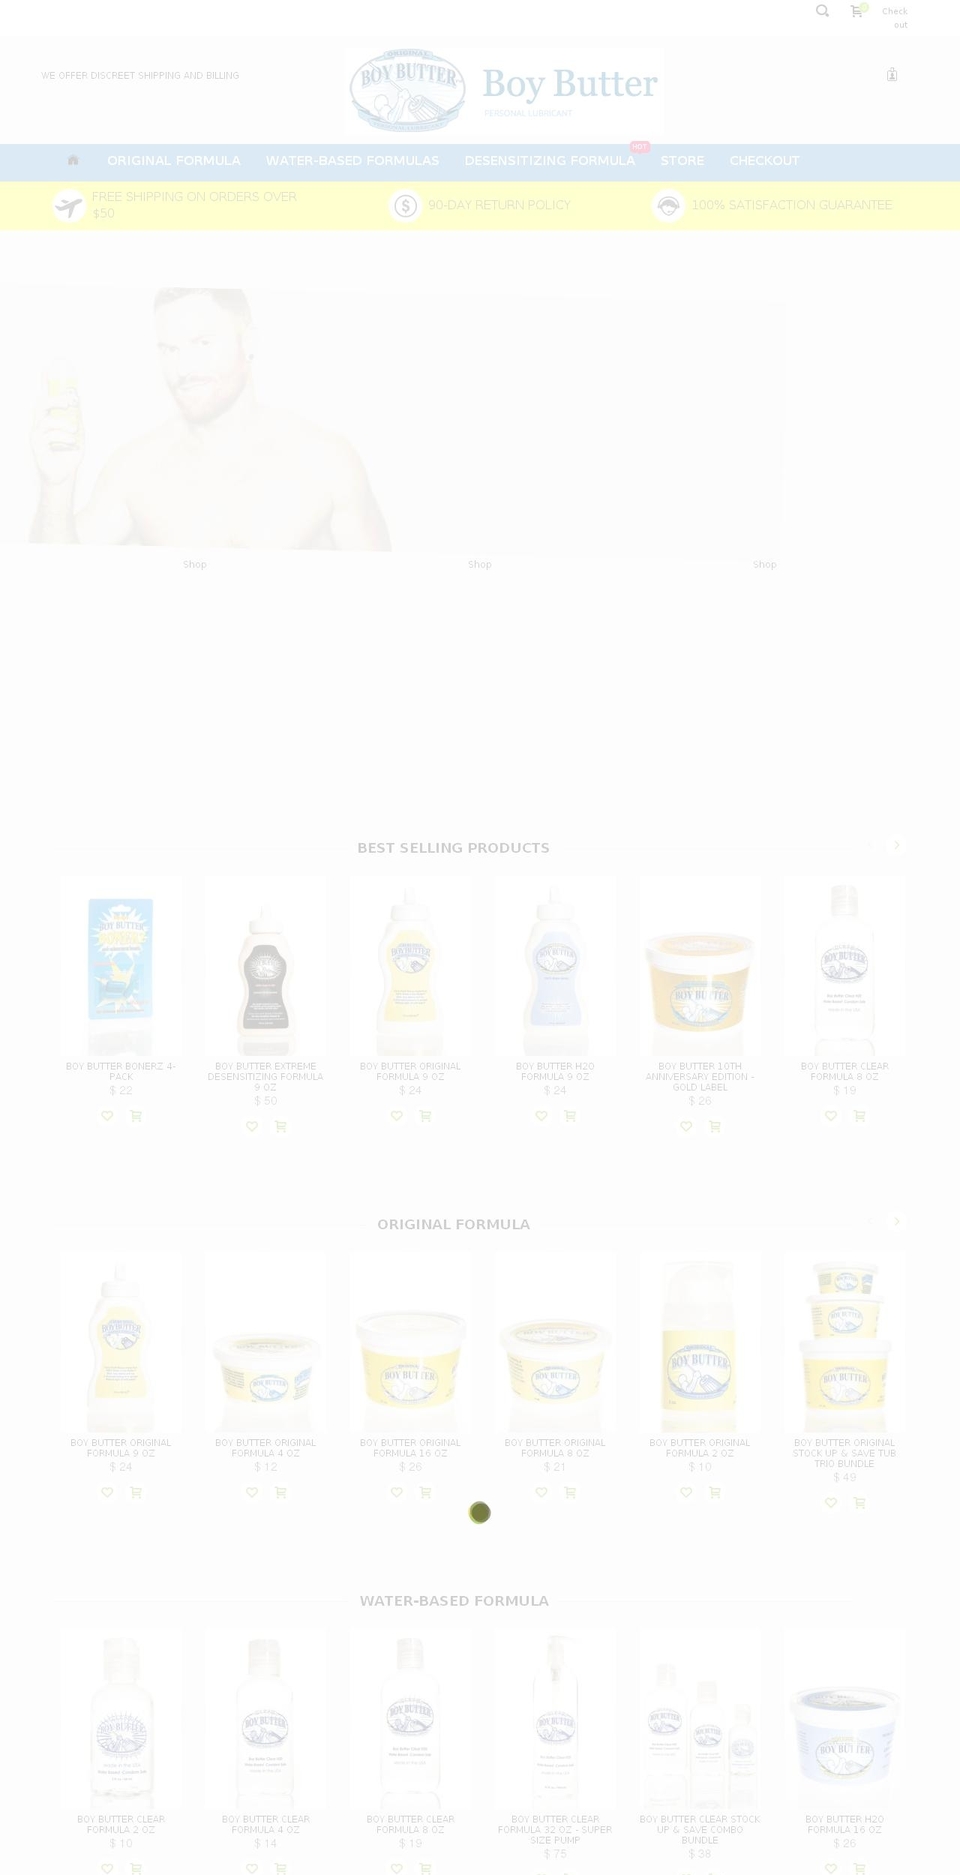 coolbaby-v1-30 Shopify theme site example boybutter.com